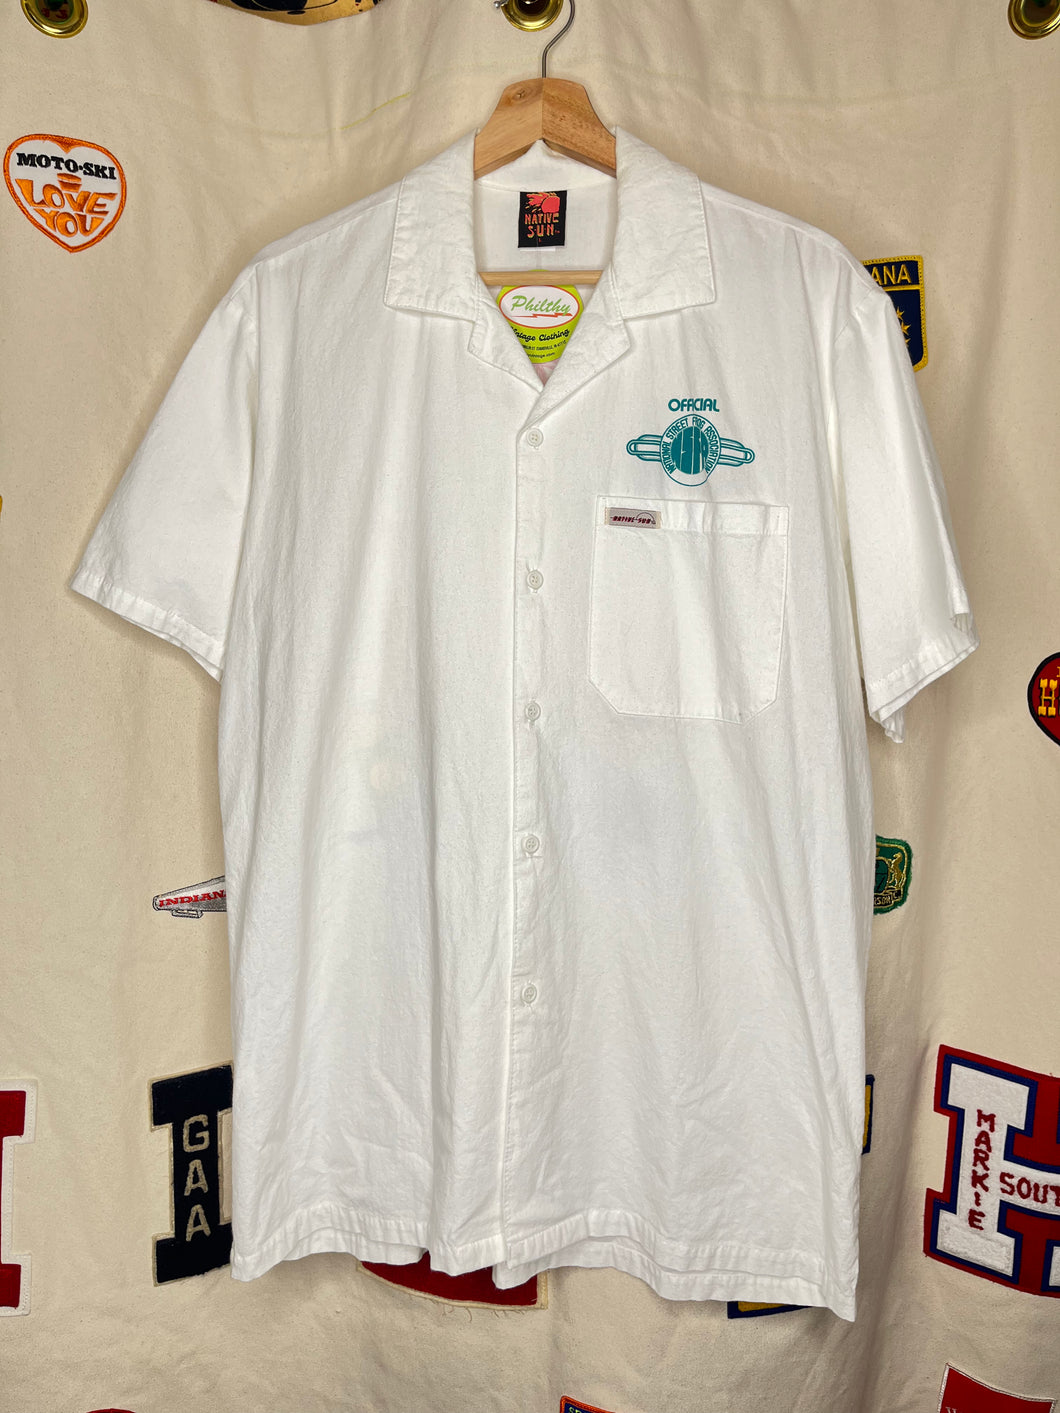 Vintage Frog Follies Car Show 1993 White Printed Button Up Shirt: Large